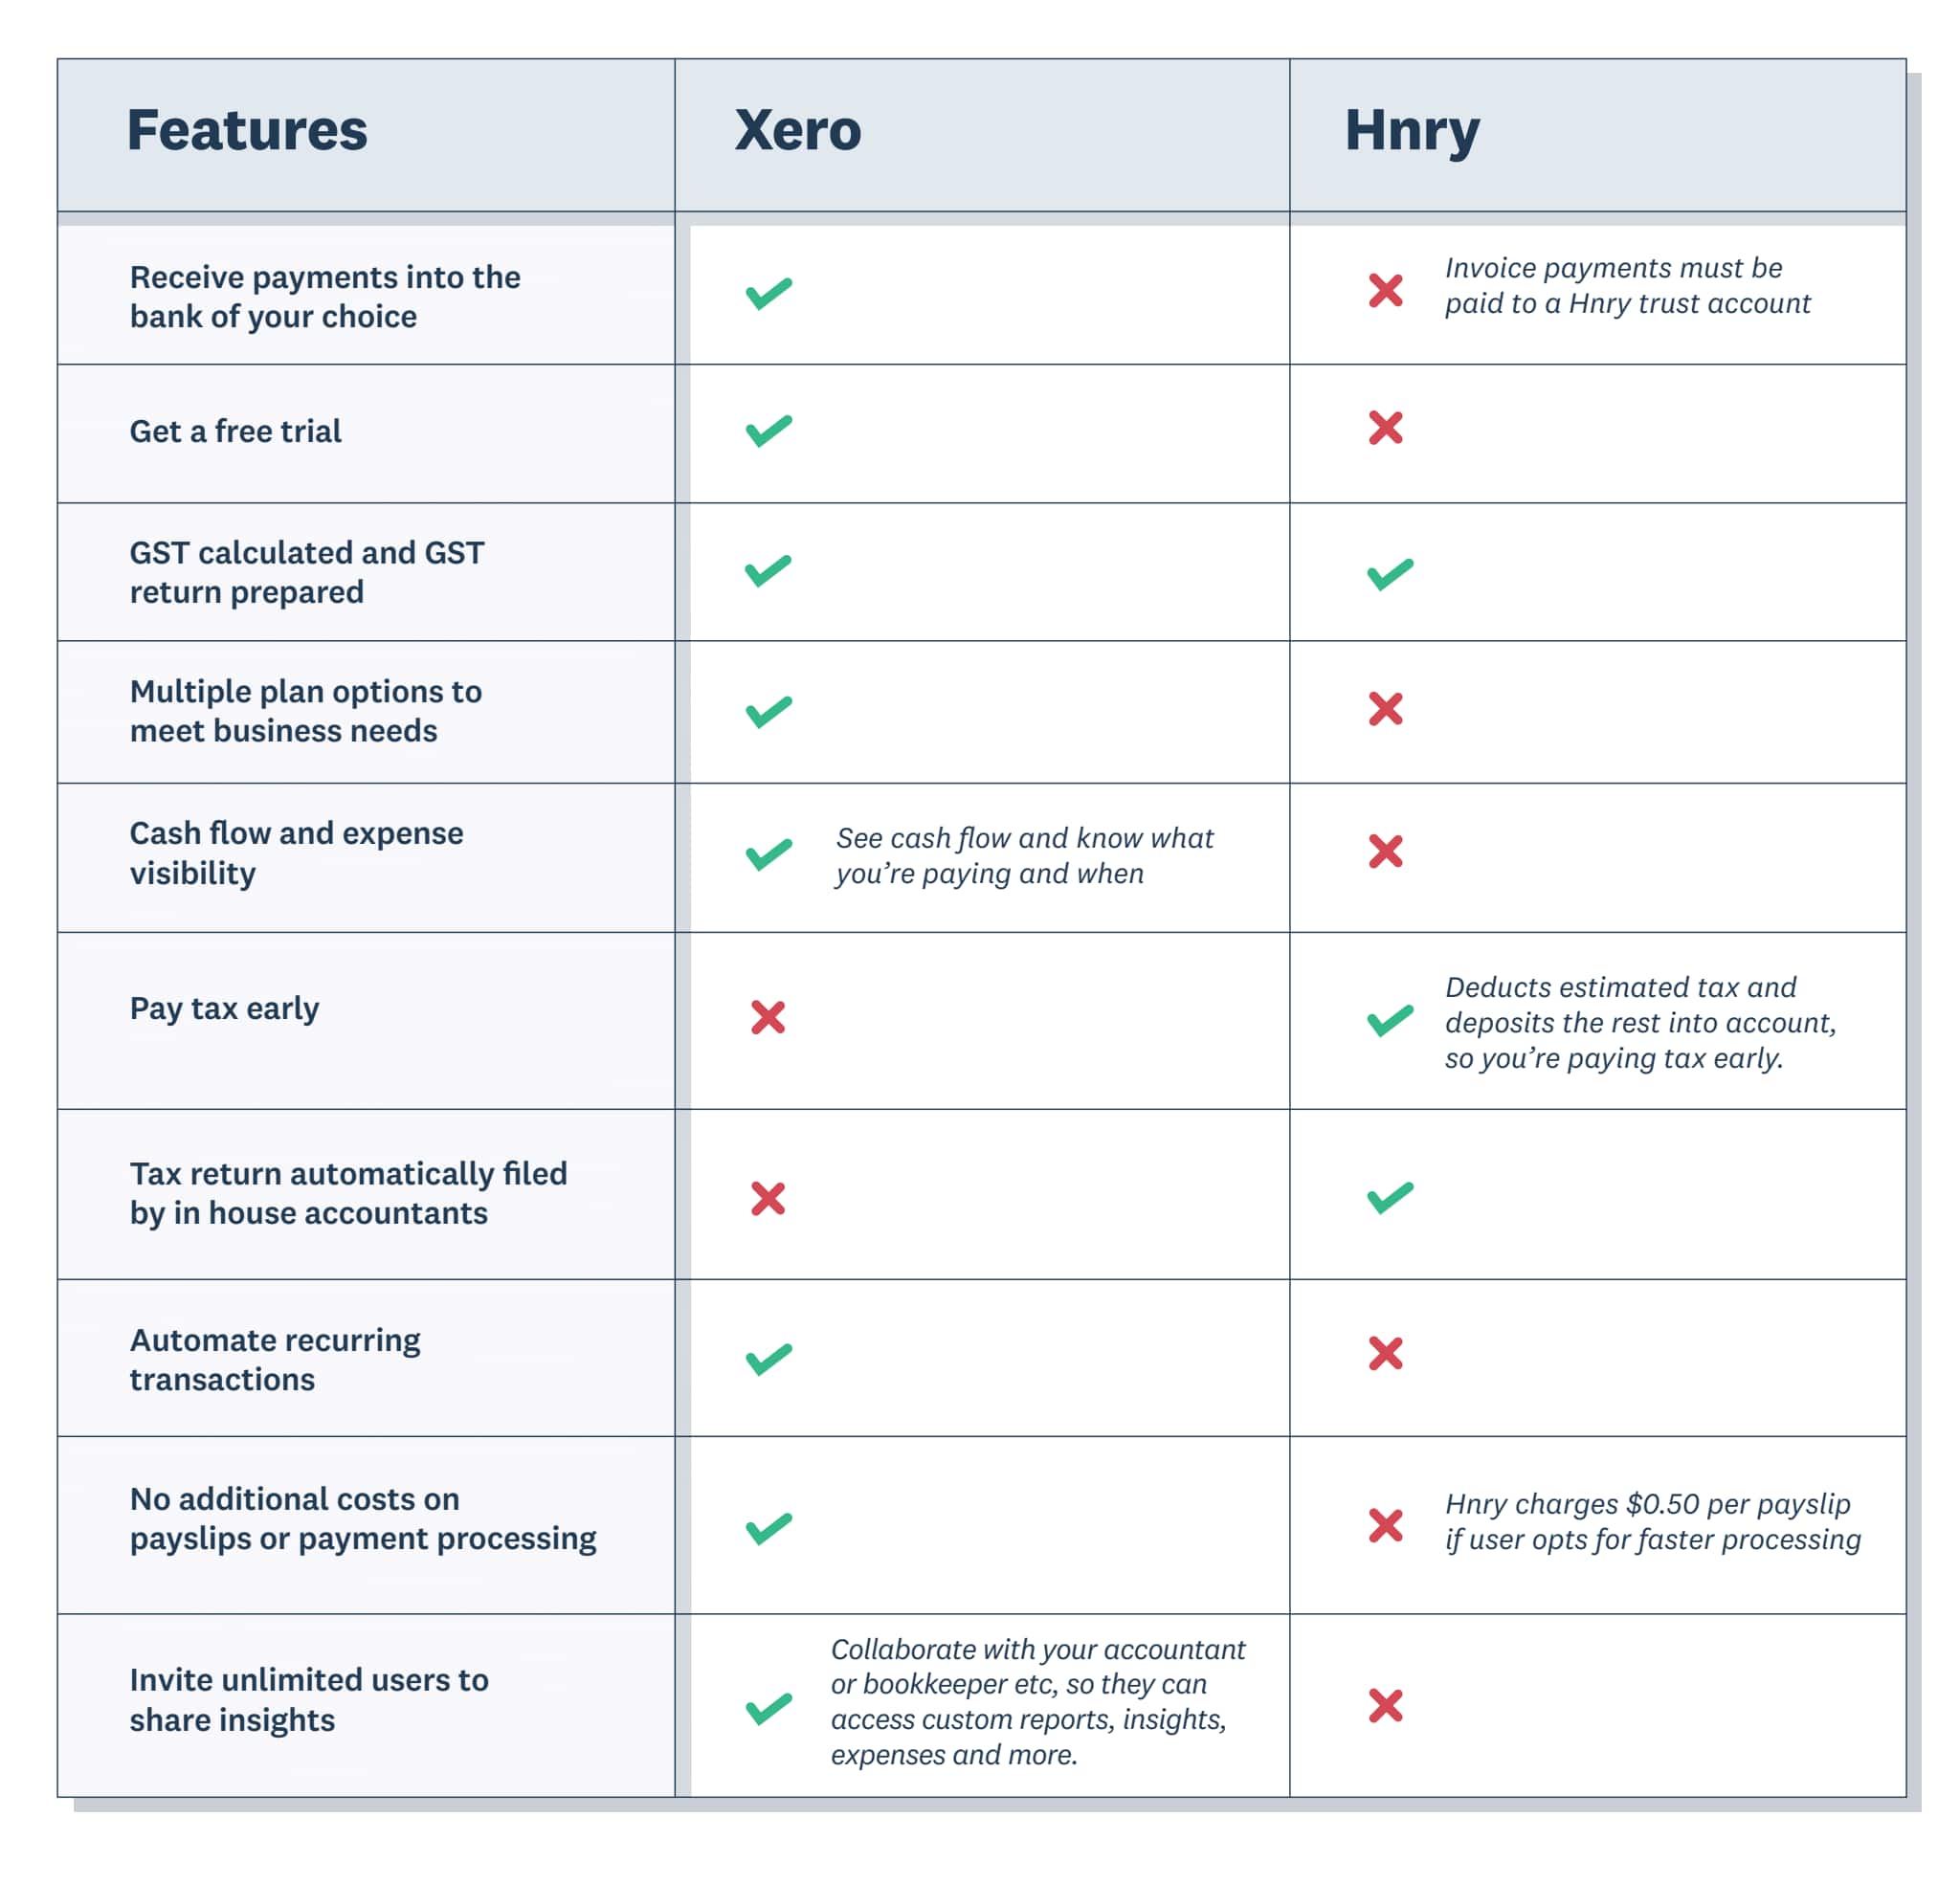 A table outlining the differences between Hnry vs Xero, and showing why it’s worth considering Xero as a Hnry alternative.